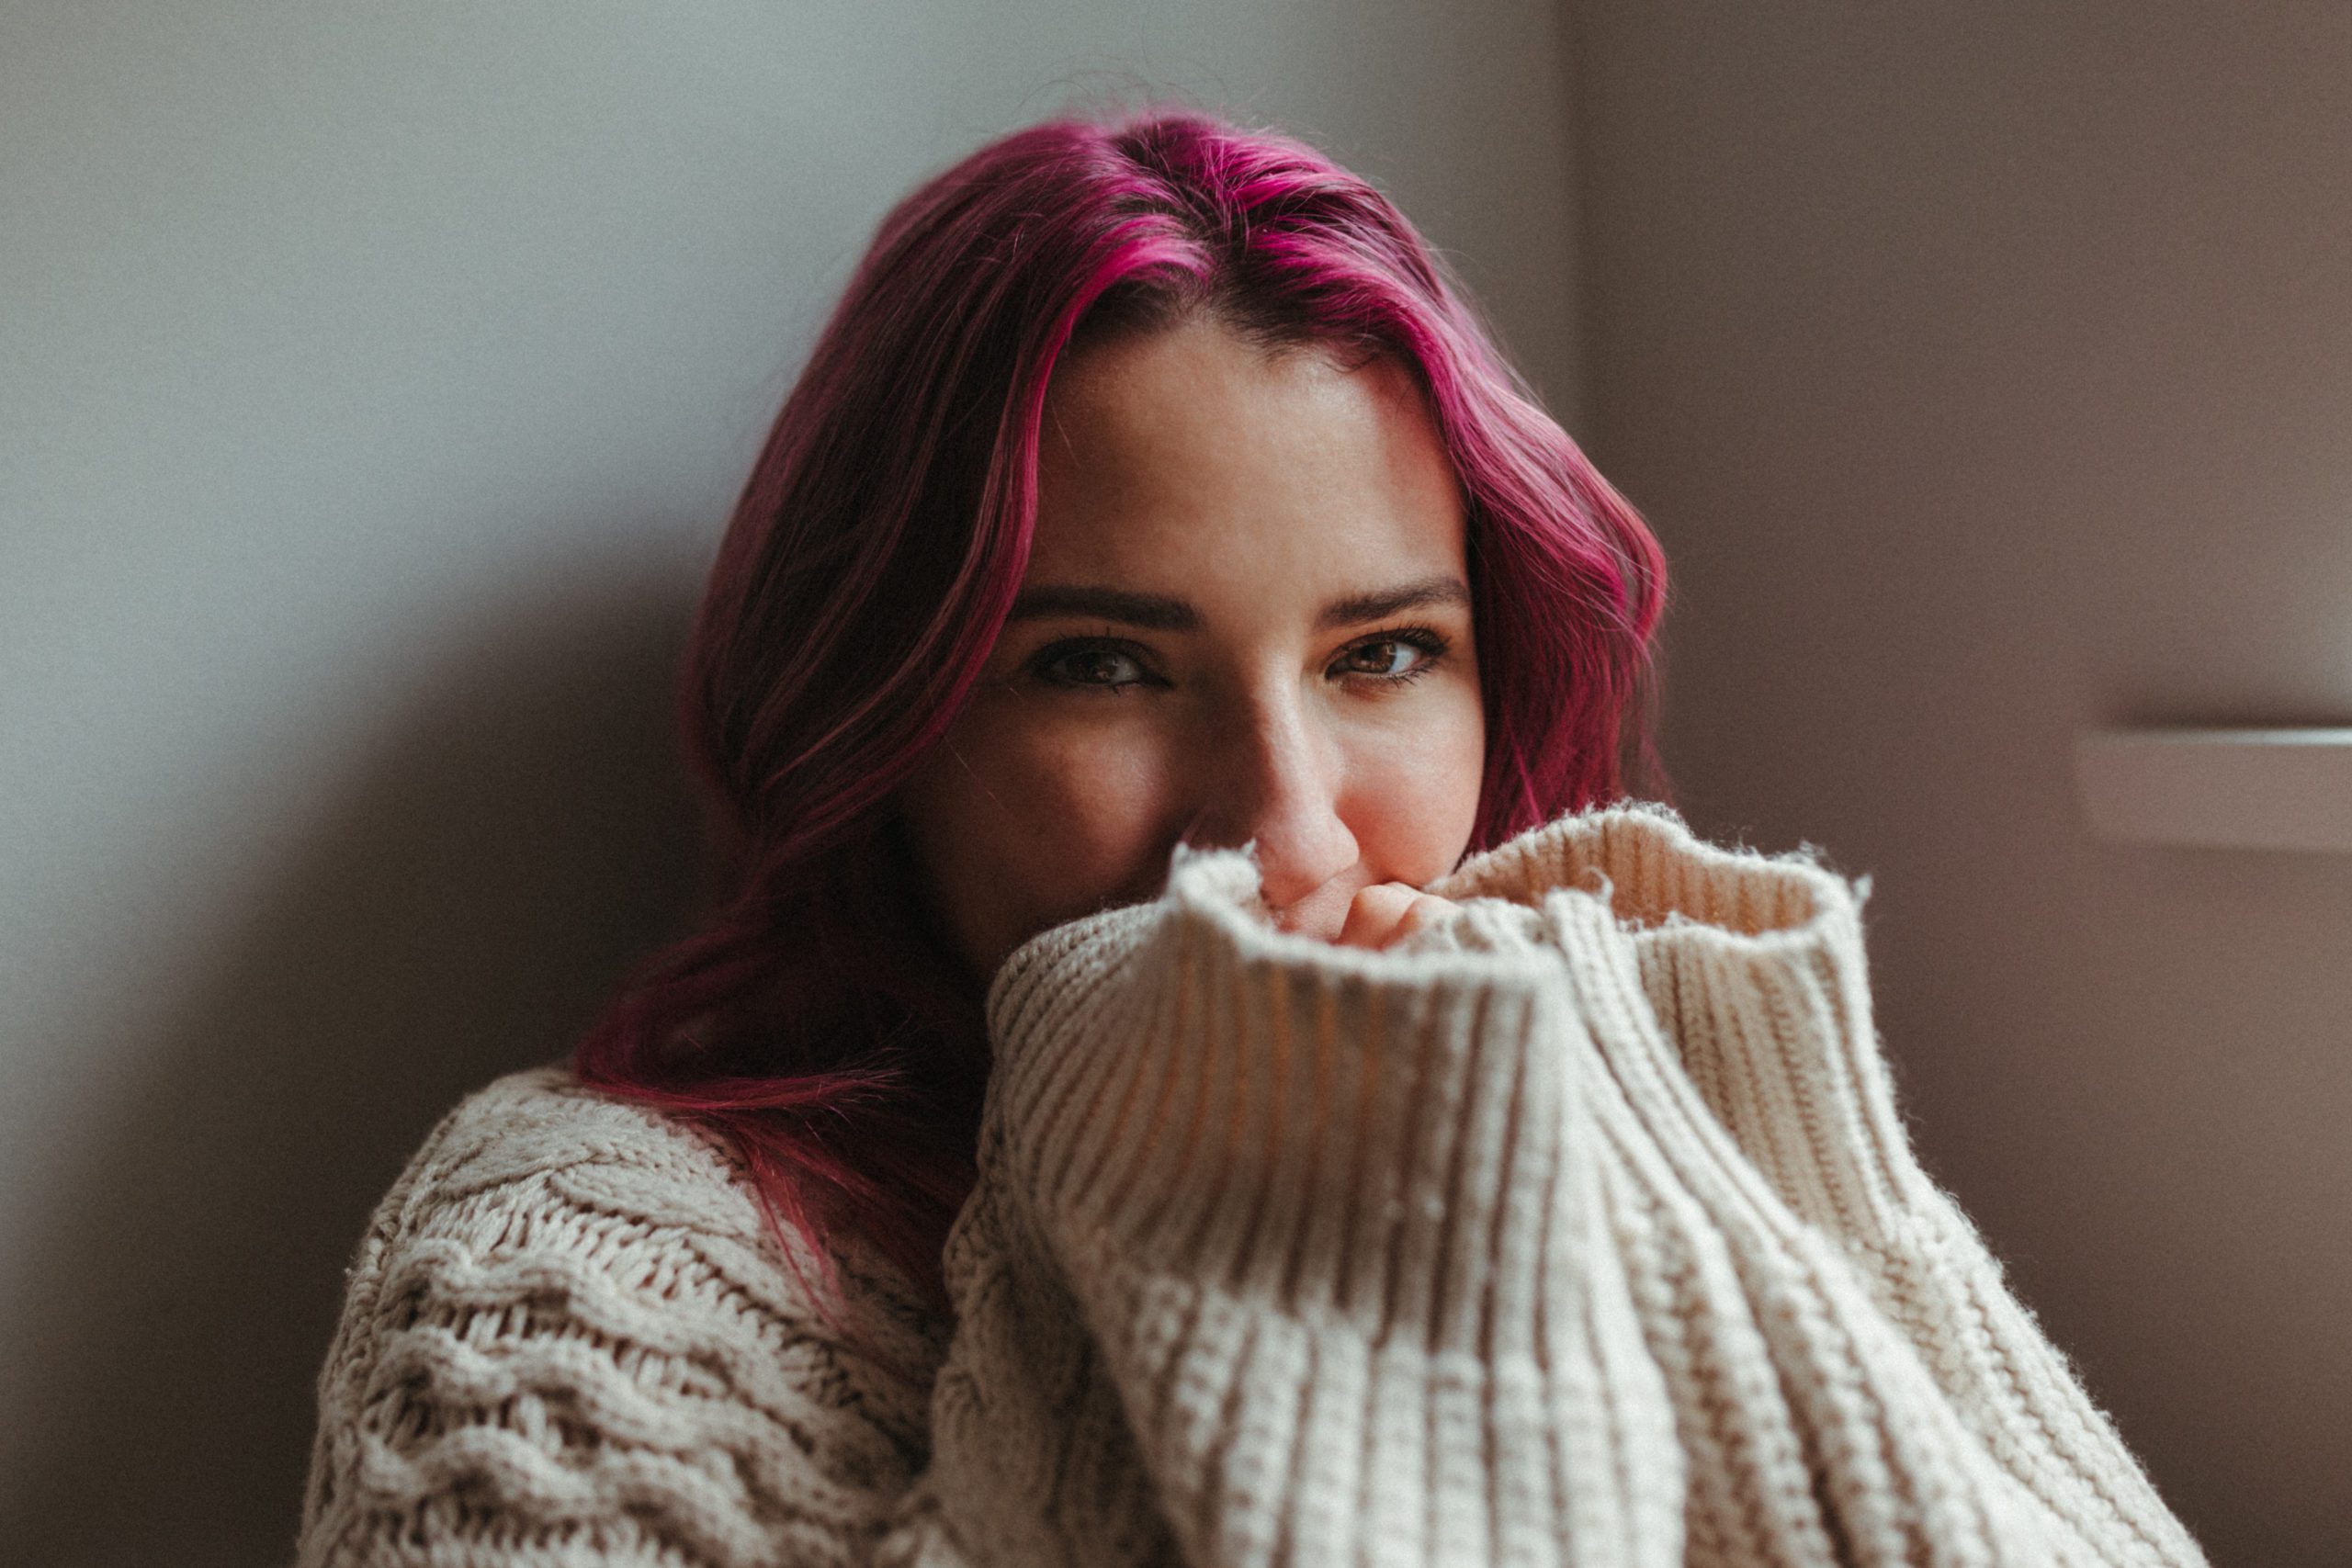 Young girl with pink hair holding her hands up to her face in a long sleeve sweater